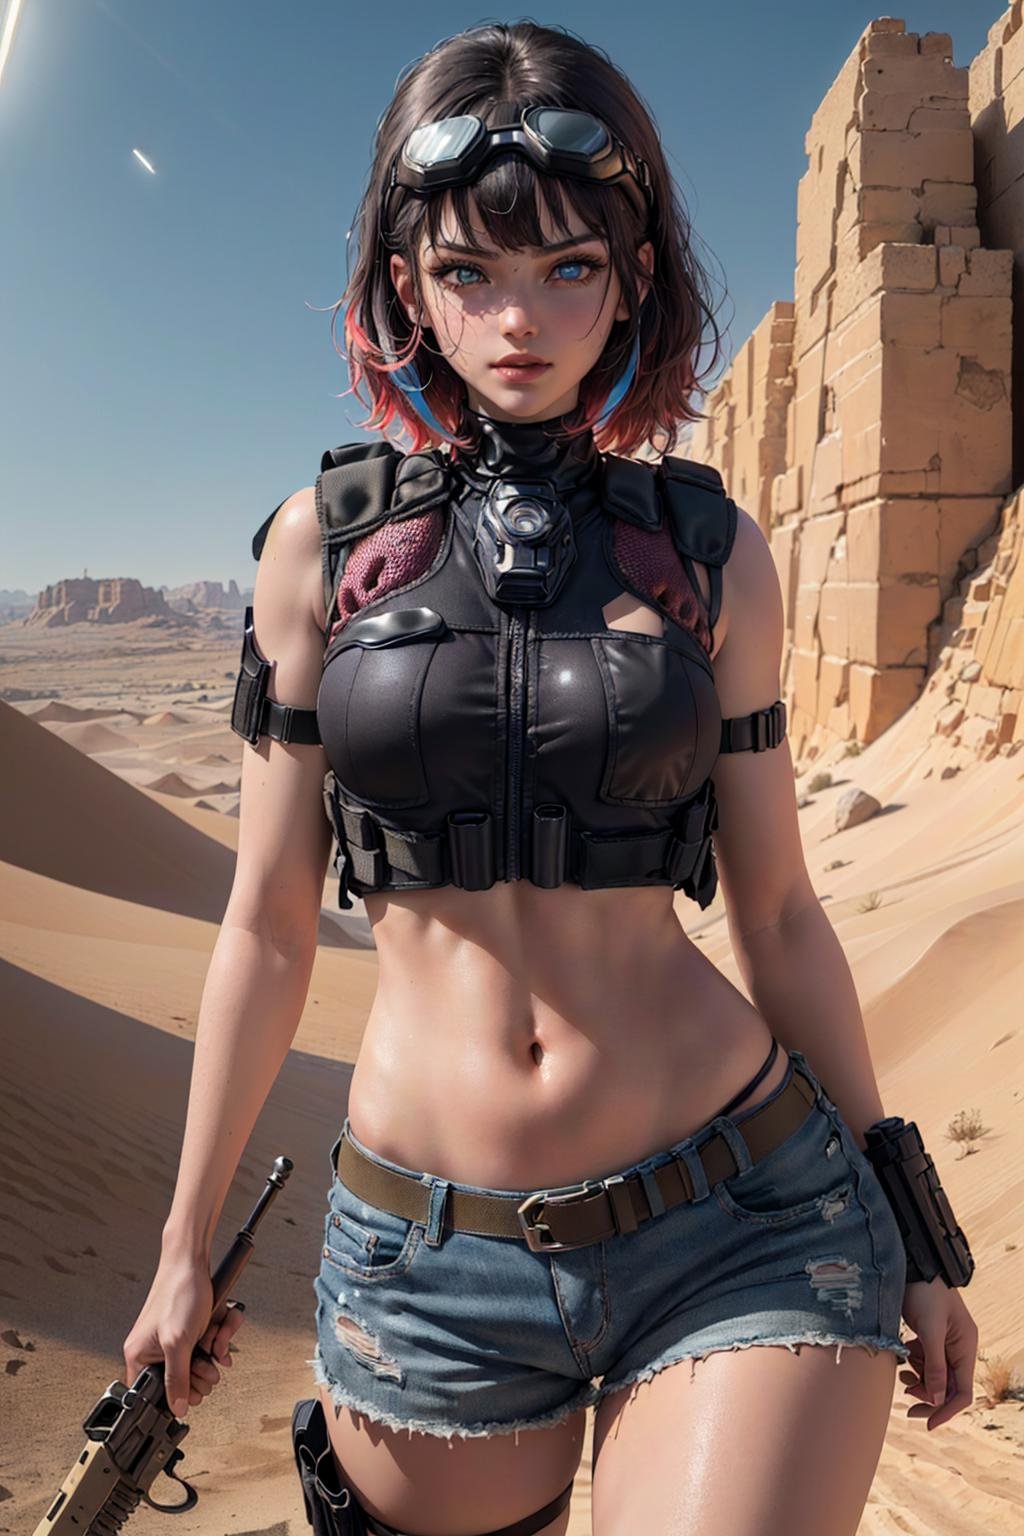 (1girl), ((desert combat outfit, holding weapon, tactical goggles, bullet vest, Fully clothed:1.4)), ((small Breasts, rounded breasts:1.3)), ((accentuated breast, large pelvic, wide hip, midriff, narrow waist, curvy waist:1.2)), ((slim, skinny waist, slender, skinny stomach:1.2)), modern hairstyle, colour streaked hair, hair highlights, ((smug face)), ((tattoo:1.1)),masterpiece, best quality, realistic, ultra highres, depth of field, (full dual colour neon lighting:1.2), (detailed face:1.2), (detailed eyes:1.2), (detailed background:1.2), (desert, action sequences, cinematic lighting, desert storm:1.2) (masterpiece:1.2), (ultra detailed), (best quality), intricate, comprehensive cinematic, magical photography, (gradients), colorful, detailed landscape, visual key, shiny skin,